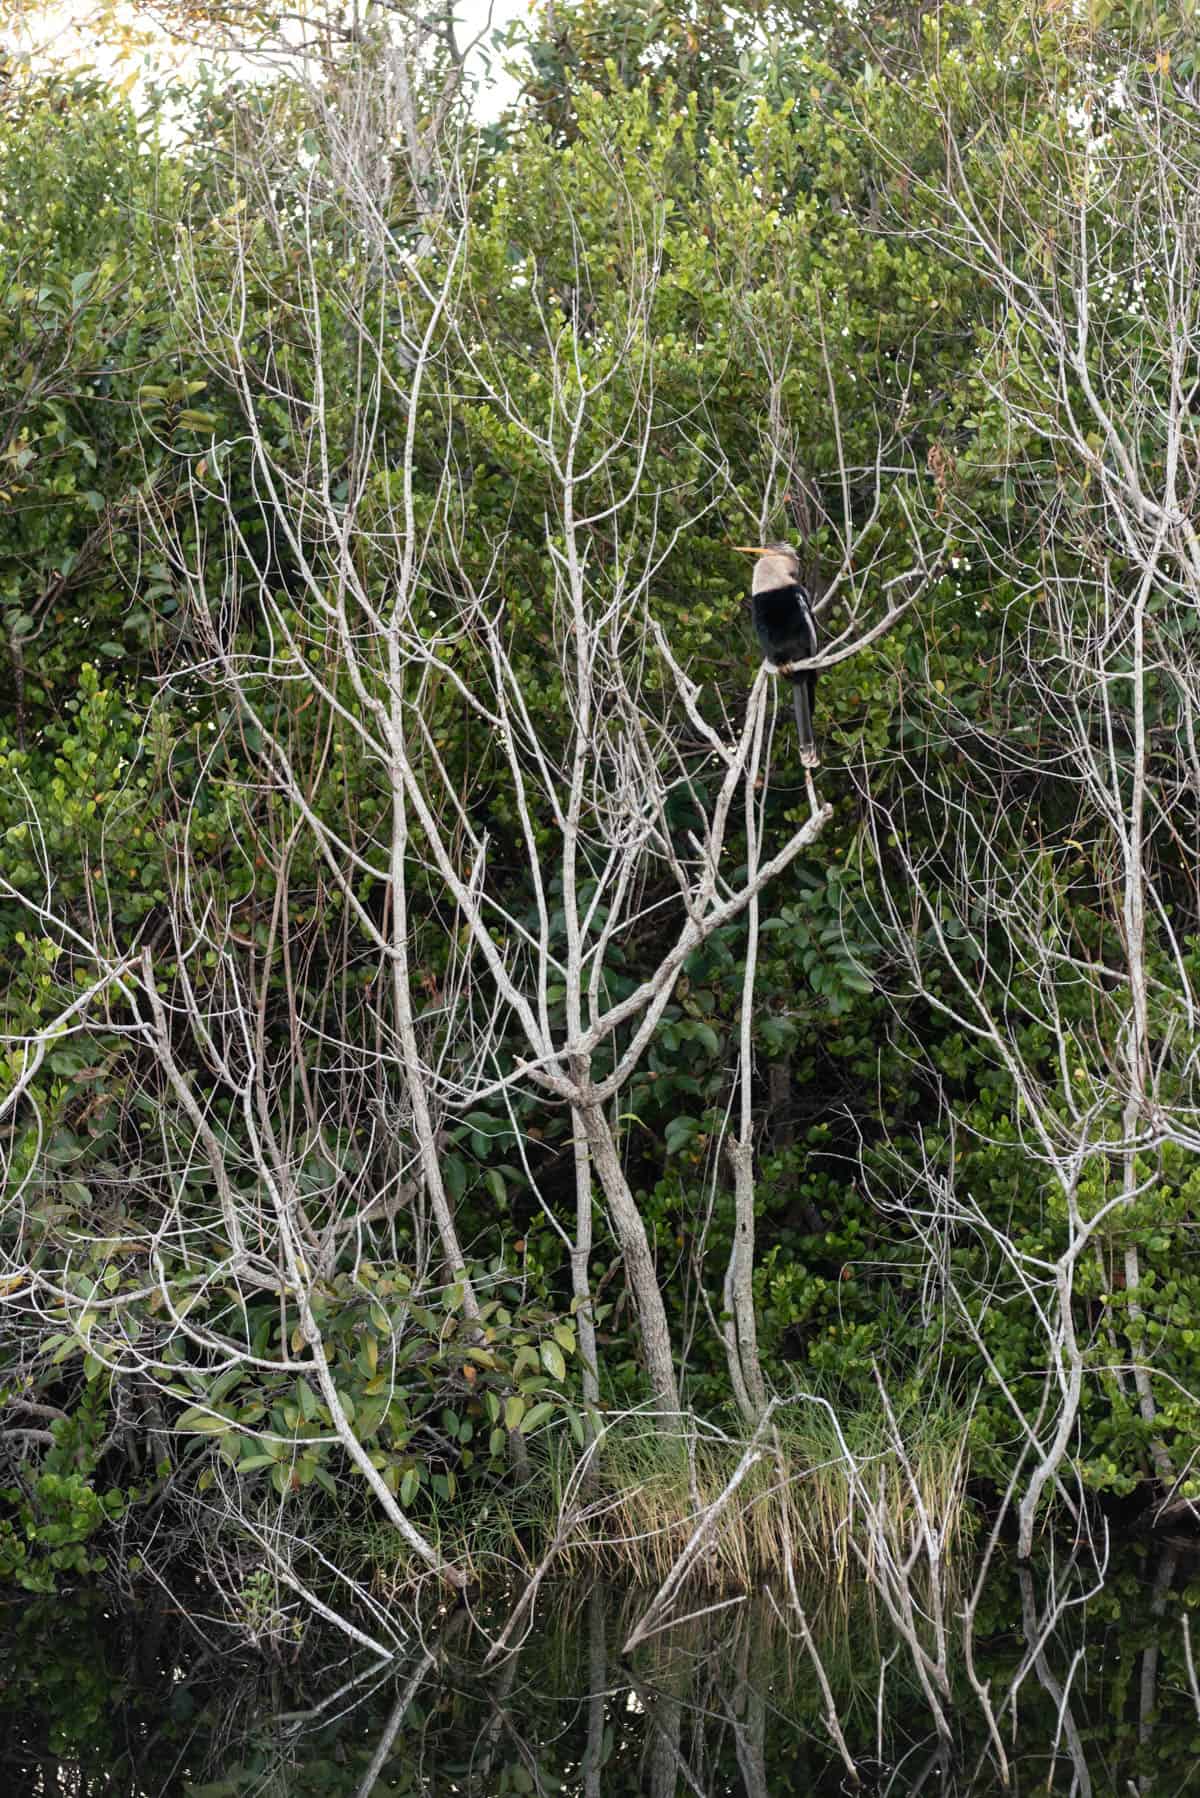 Another bird in a tree at the Florida Everglades.